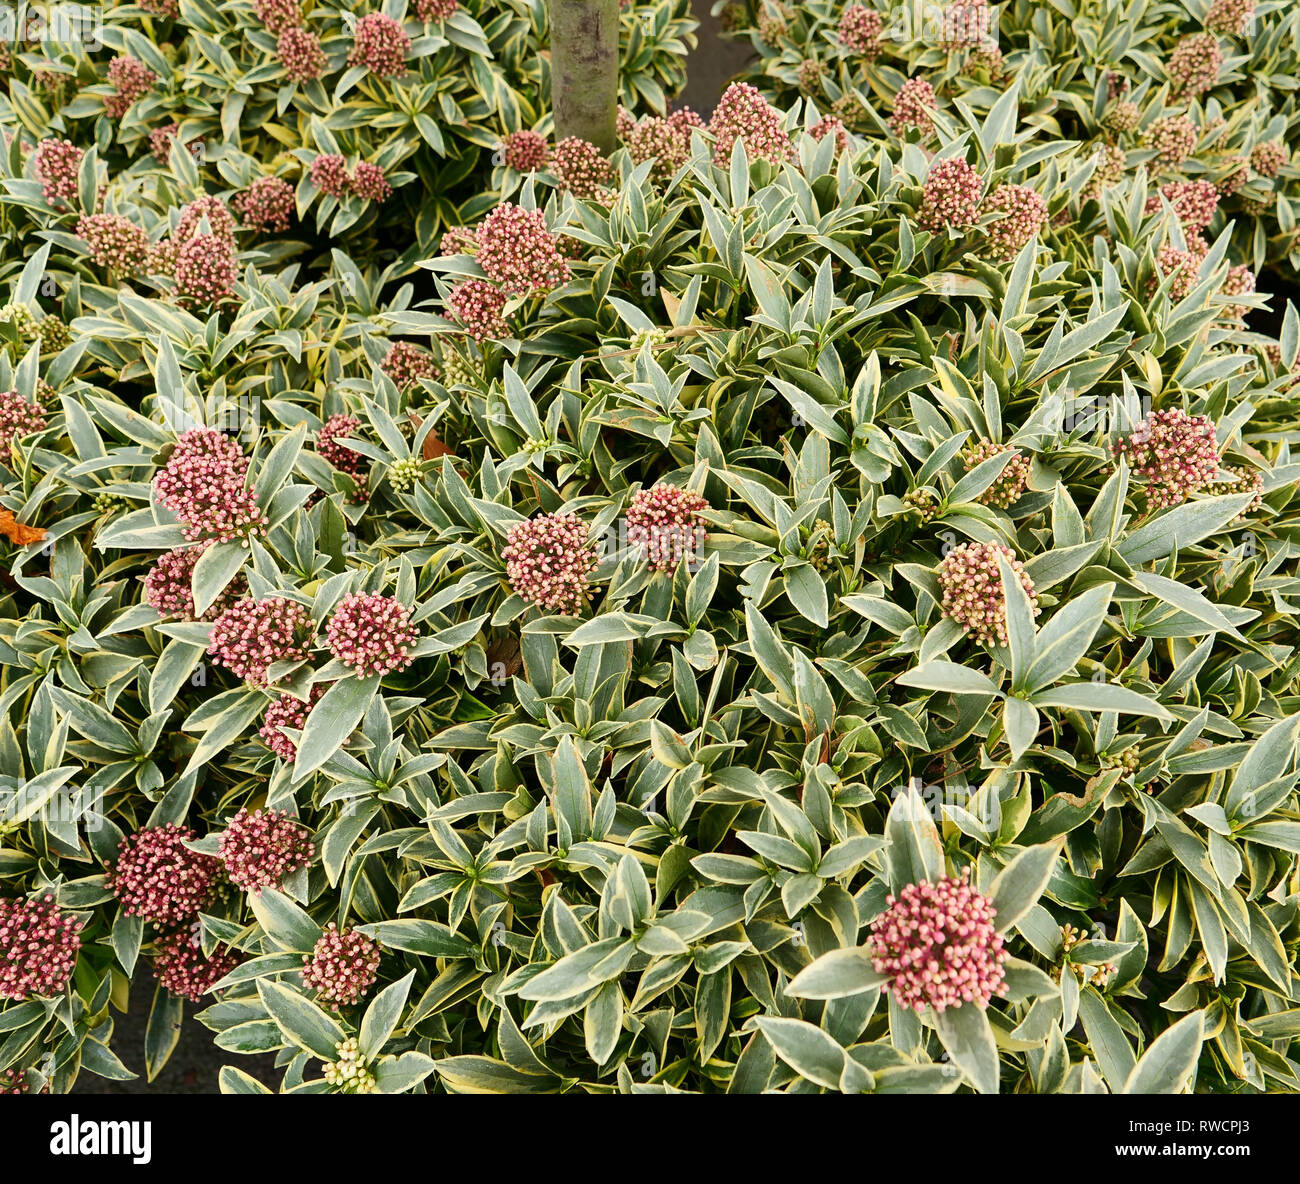 The unusual garden plant Skimmia japonica Magic Marlot with green leaves and cream edges used as a spring flowering and ground cover plant. London, UK. Stock Photo